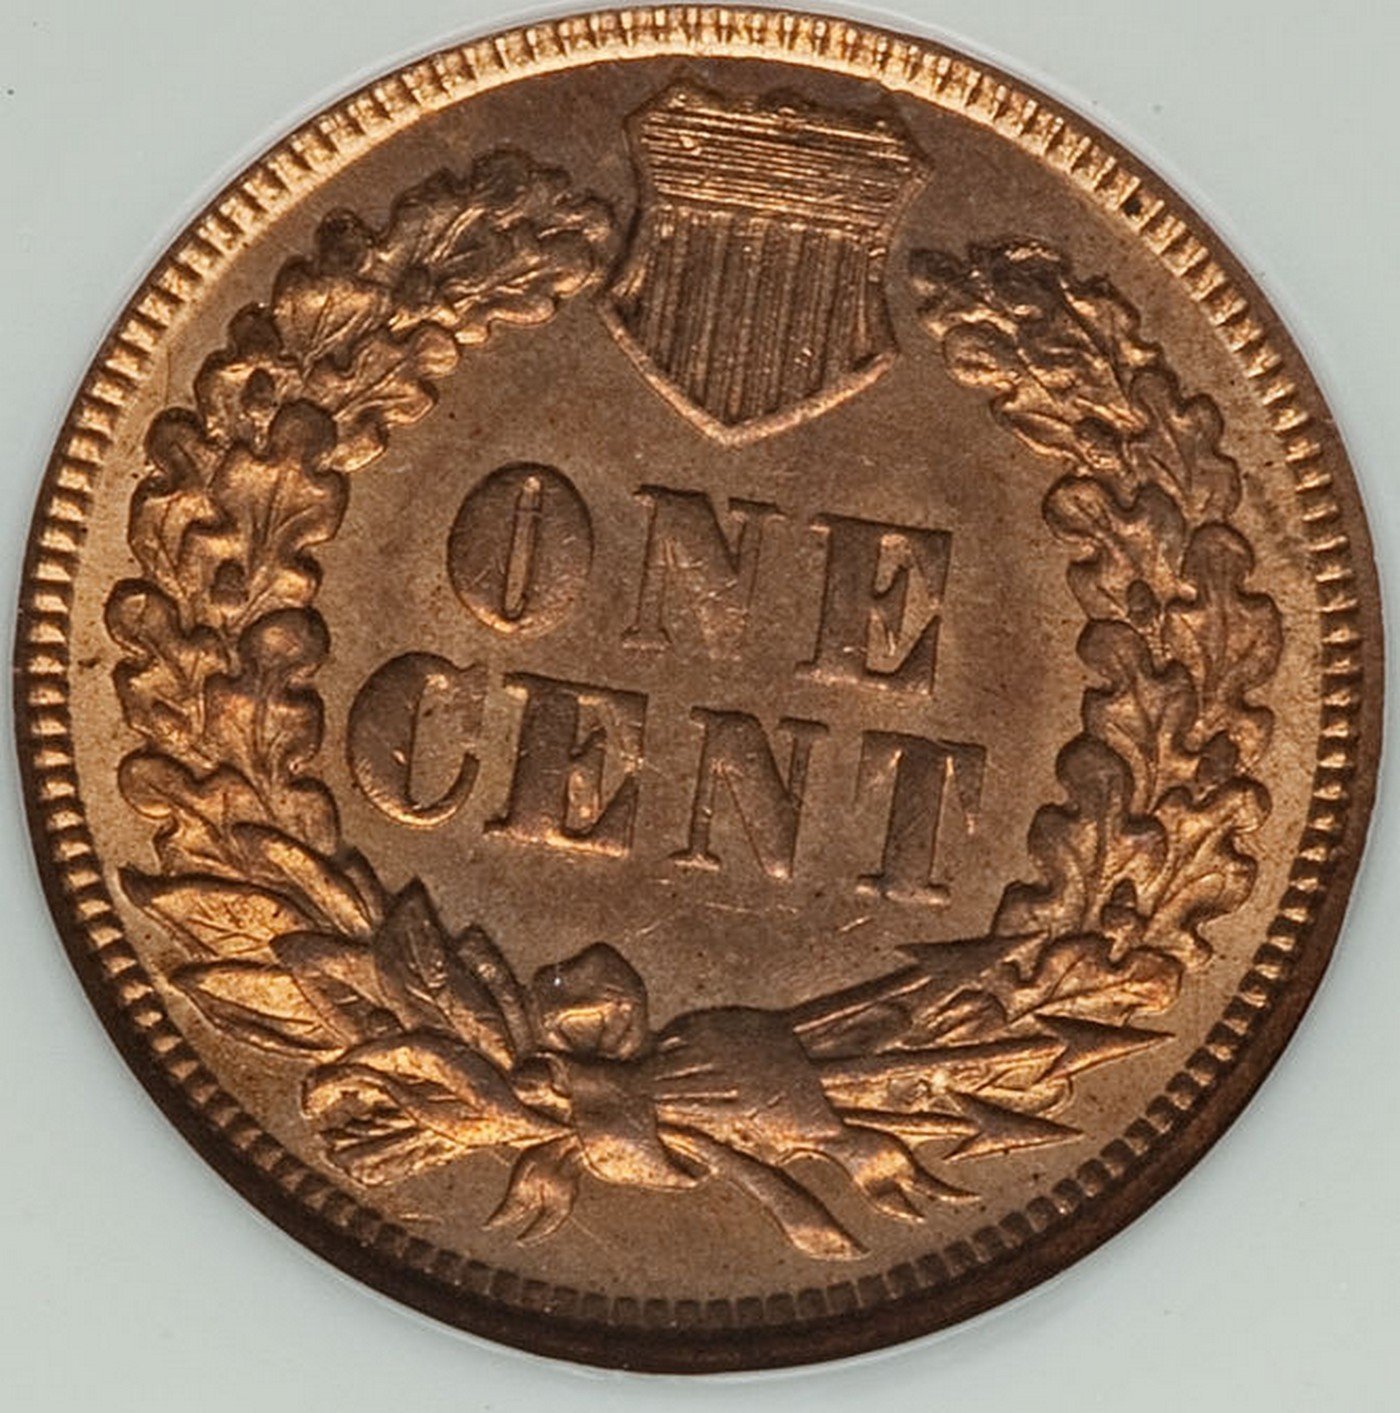 1870 DDR-021 Indian Head Penny - Photos courtesy of Heritage Auctions